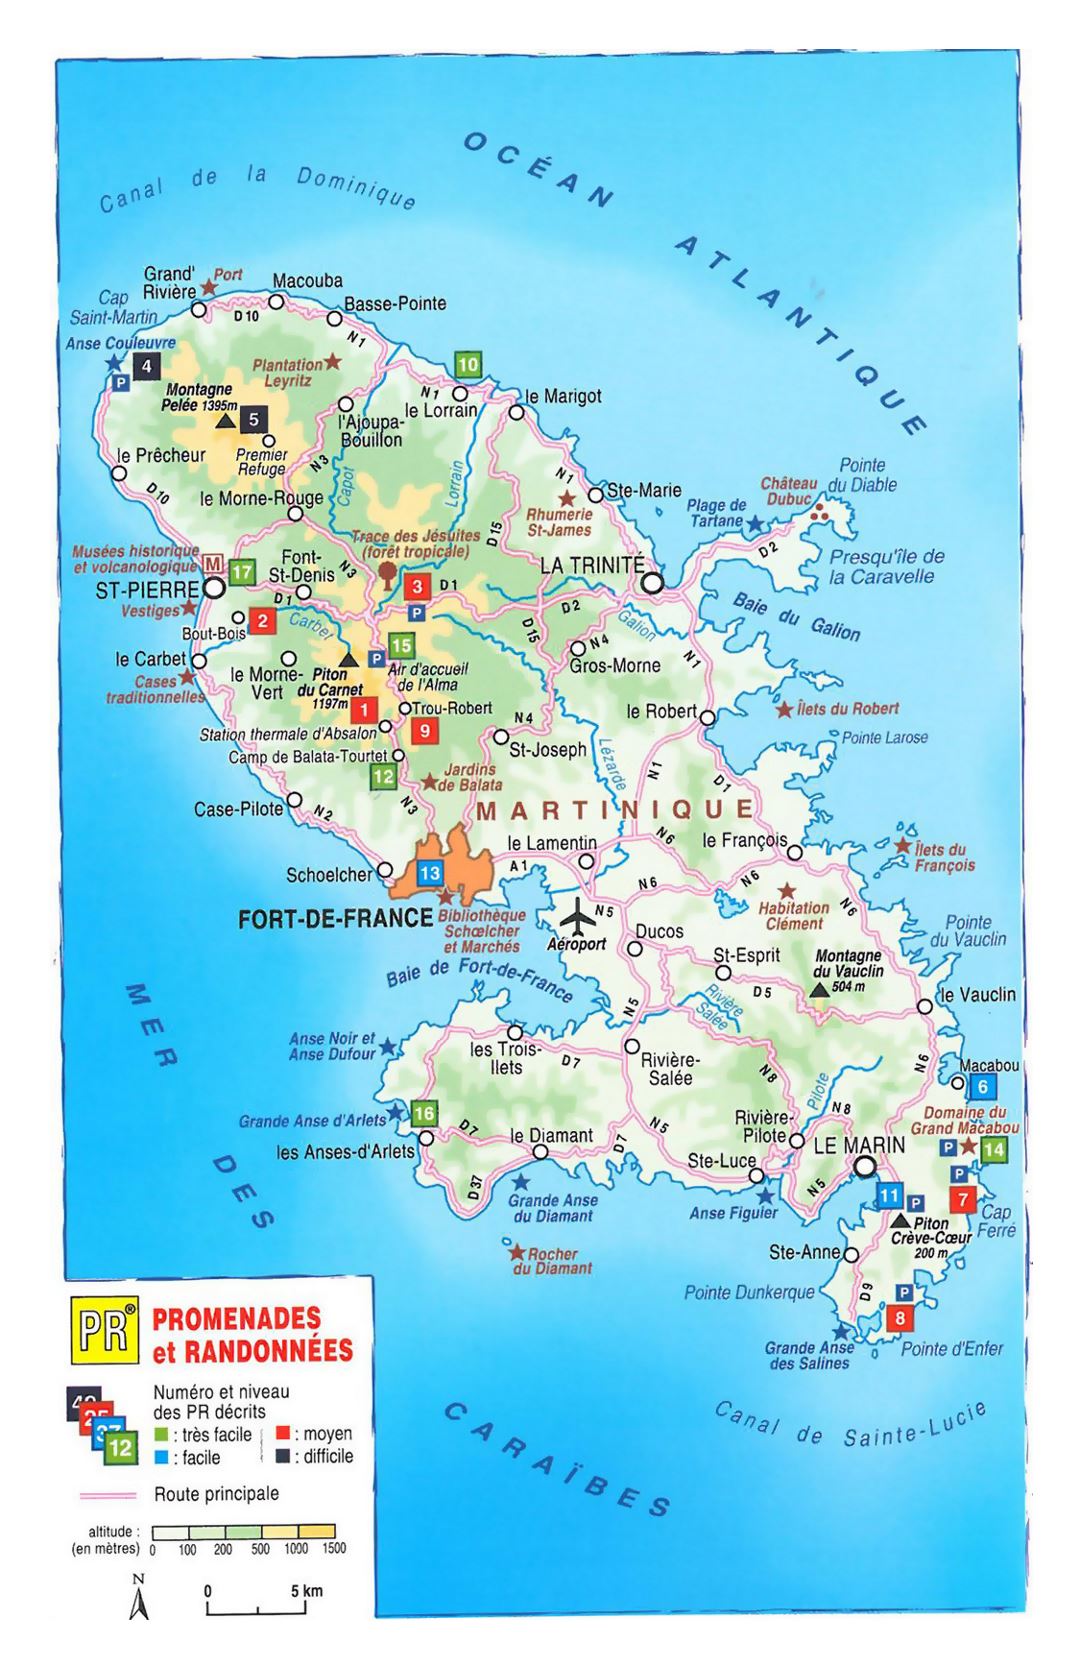 Detailed elevation map of Martinique with other marks